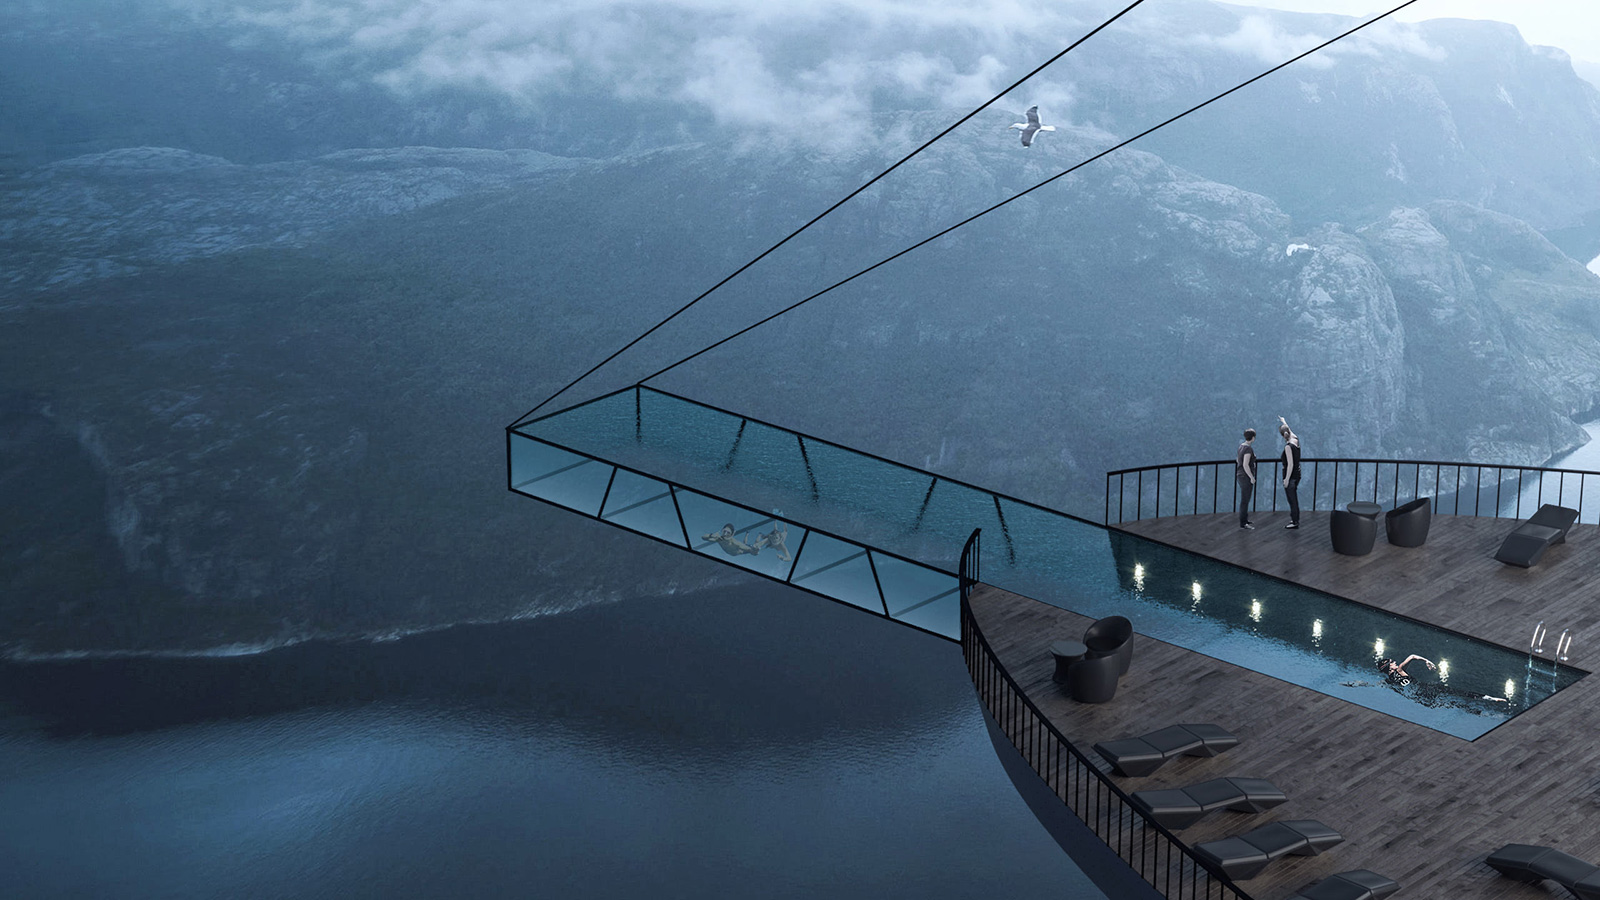 This hotel concept hangs over one of Norway’s biggest fjords